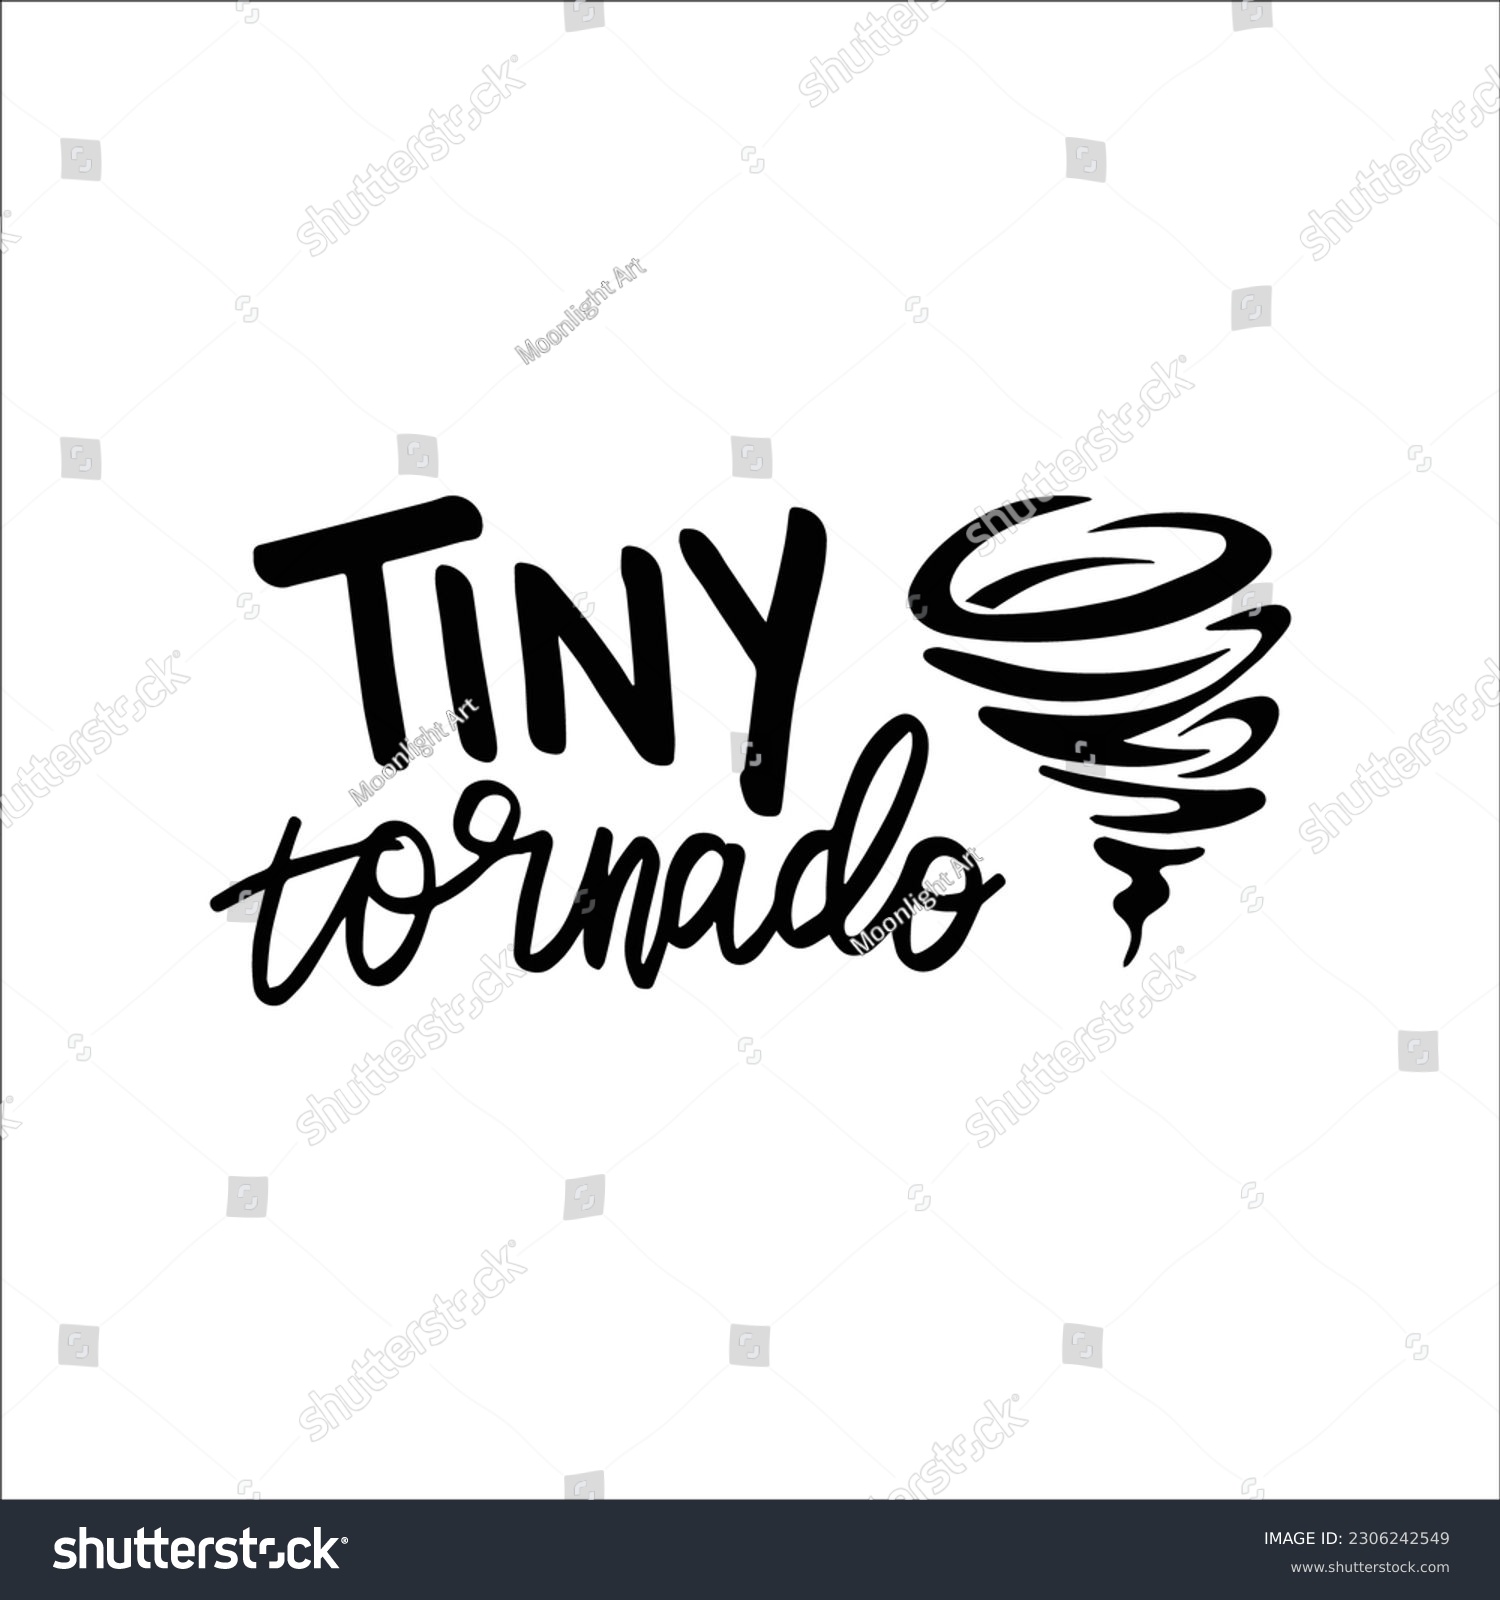 SVG of Tiny Tornado SVG, Funny Kids Quote, Funny Toddler SVG Saying, Terrible Twos svg, Sassy, Sarcastic svg, Chaos, Kid Life Cut File svg